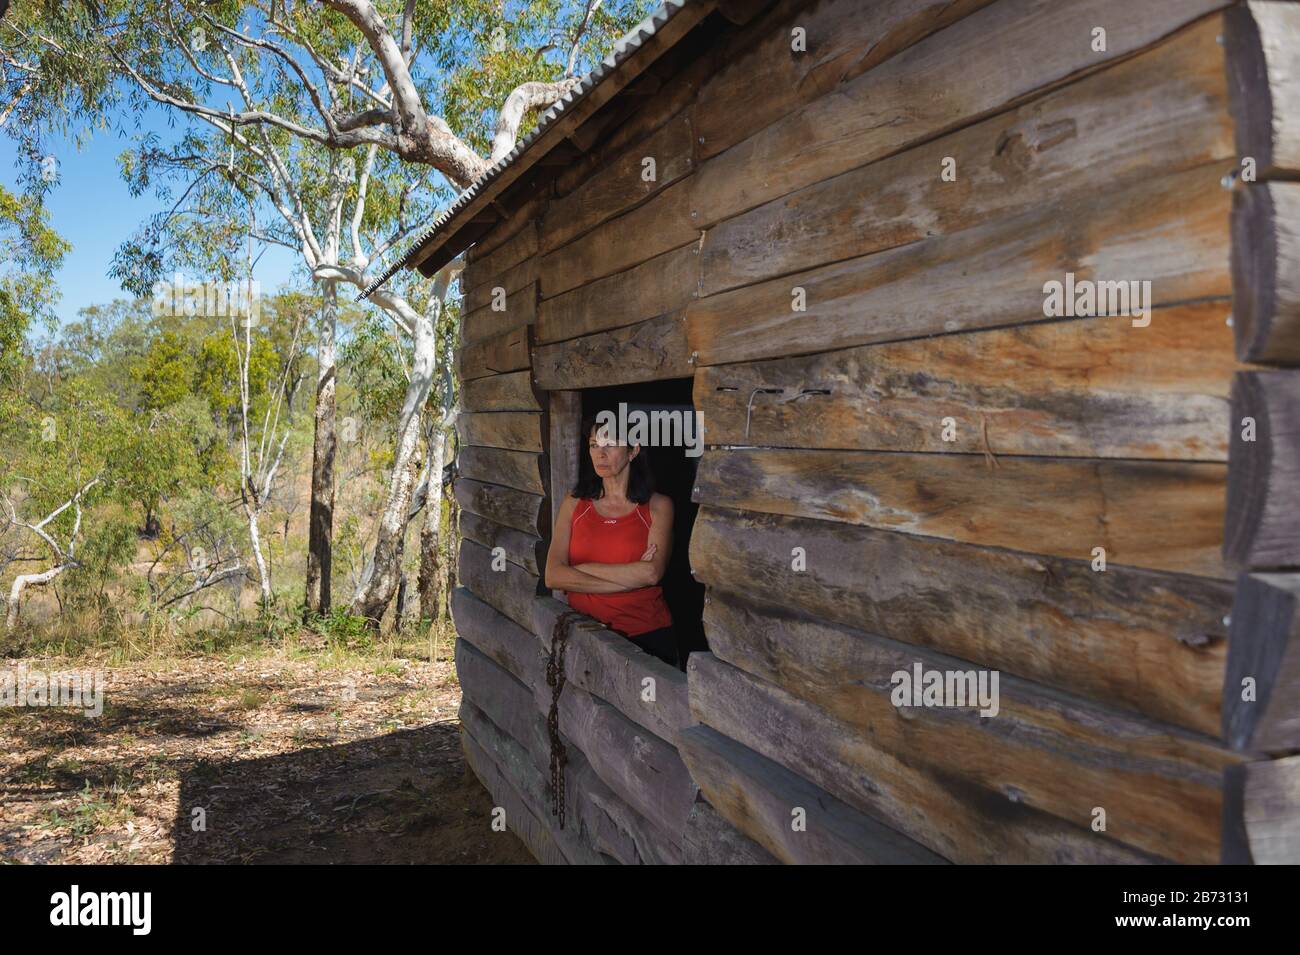 Historical replica log settlers hut with female tourist in open cut window frame looking out at the surrounding sclerophyll forest. Stock Photo